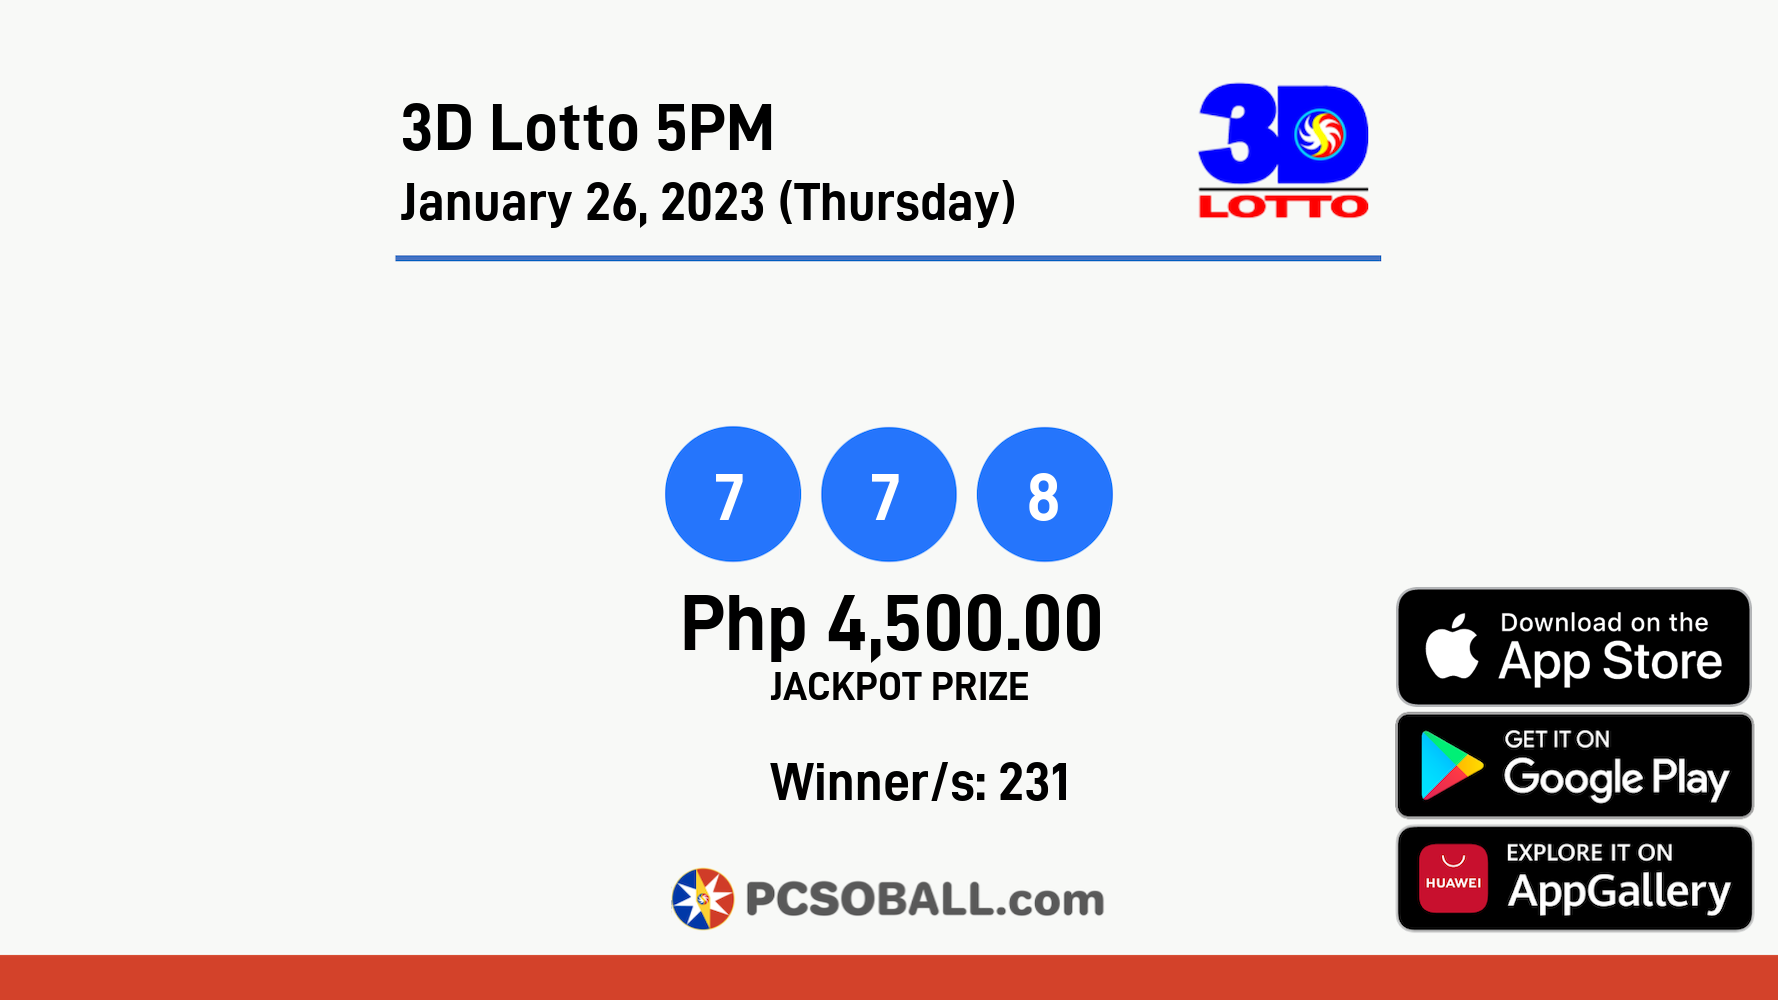 3D Lotto 5PM January 26, 2023 (Thursday) Result